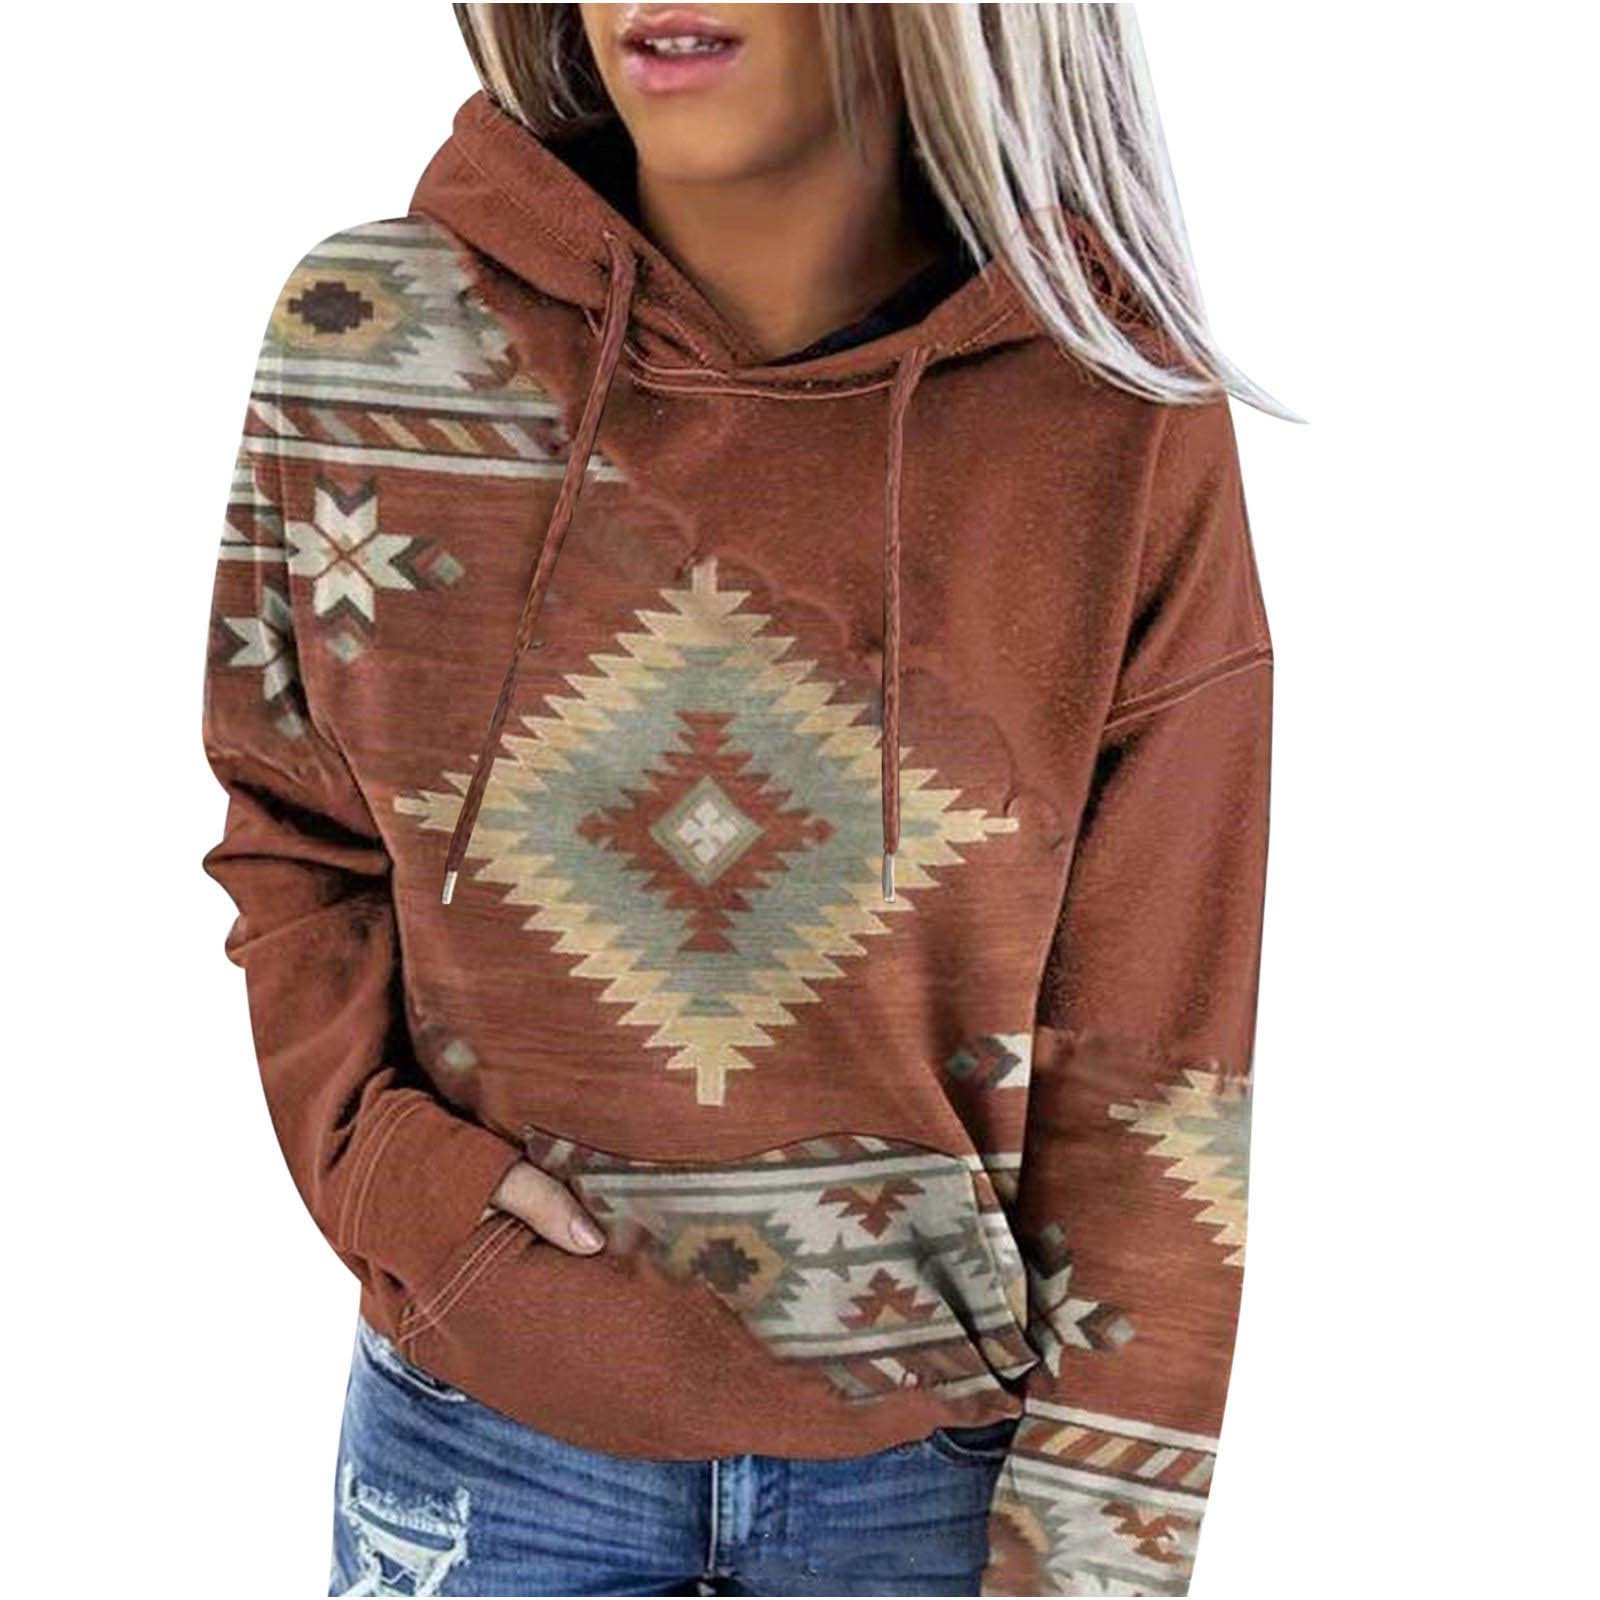 Western Shirts for Women Long Sleeve Aztec Geometric Hoodies Plus Size  Vintage Graphic Sweatshirt Casual Ethnic Pullover Tops 09-coffee 3X-Large